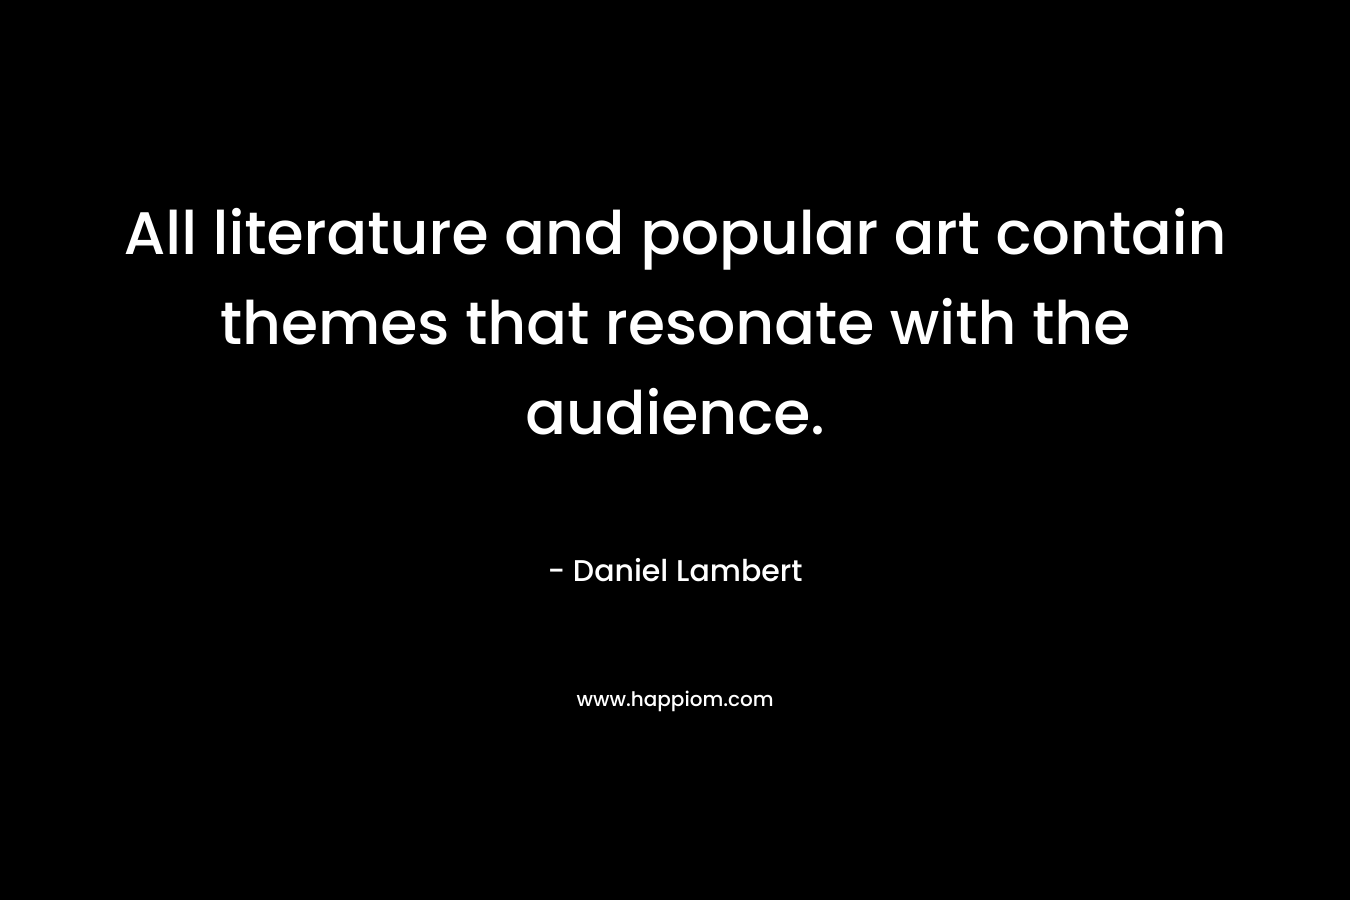 All literature and popular art contain themes that resonate with the audience. – Daniel Lambert